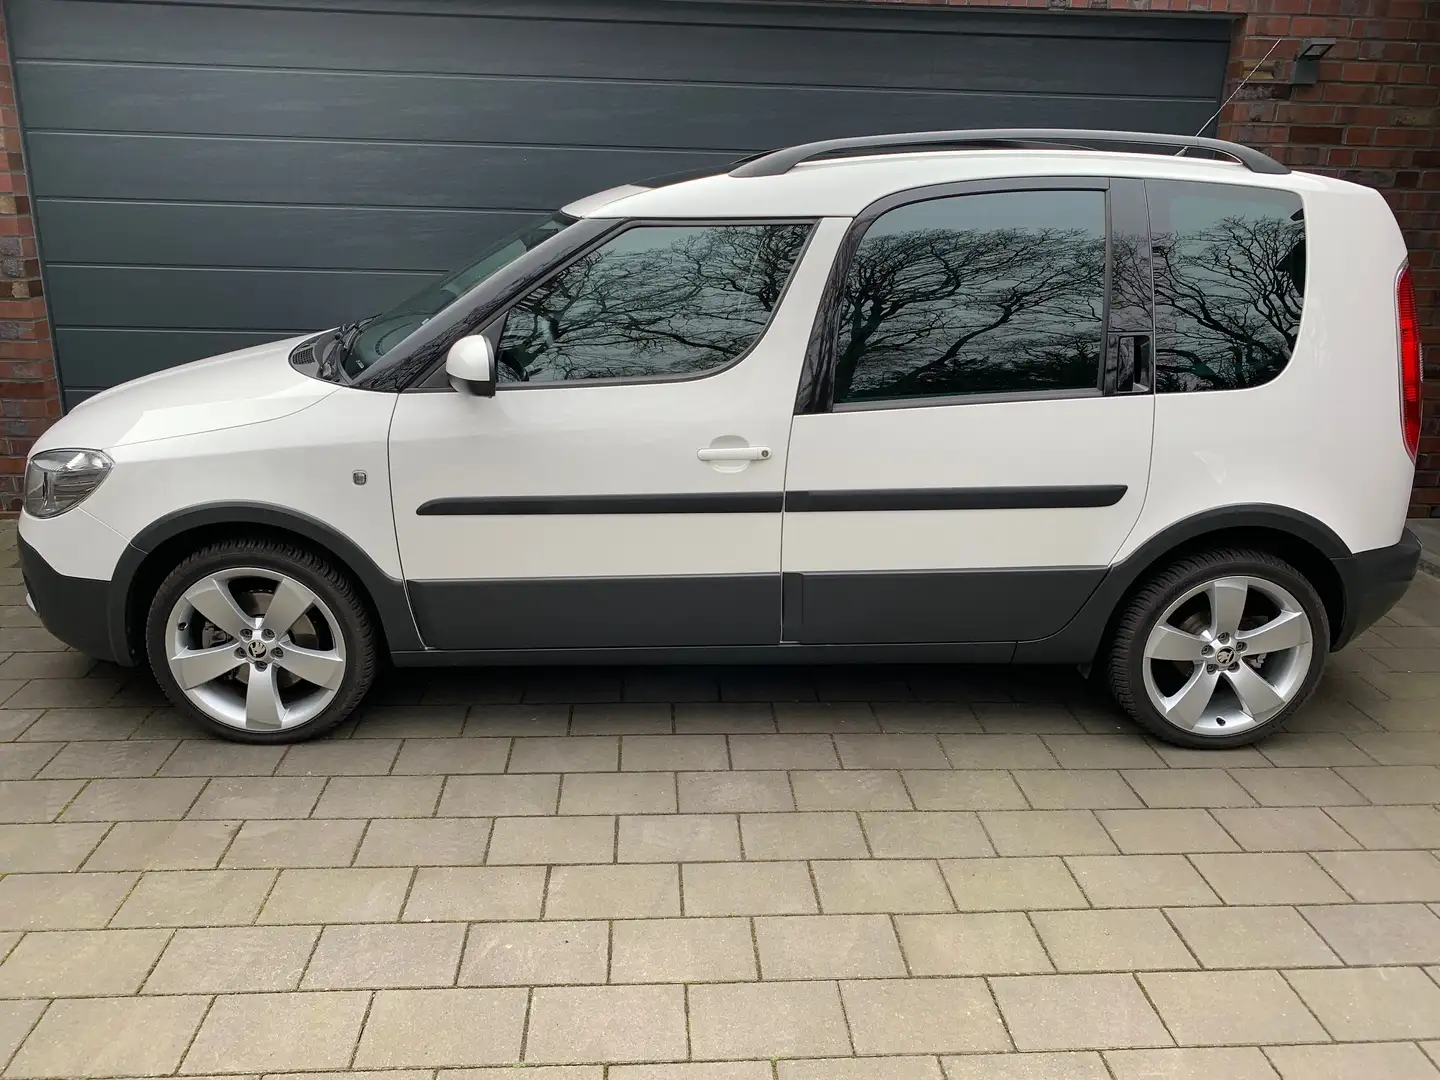 Skoda Roomster Roomster 1.2 TSI DSG Scout - 2